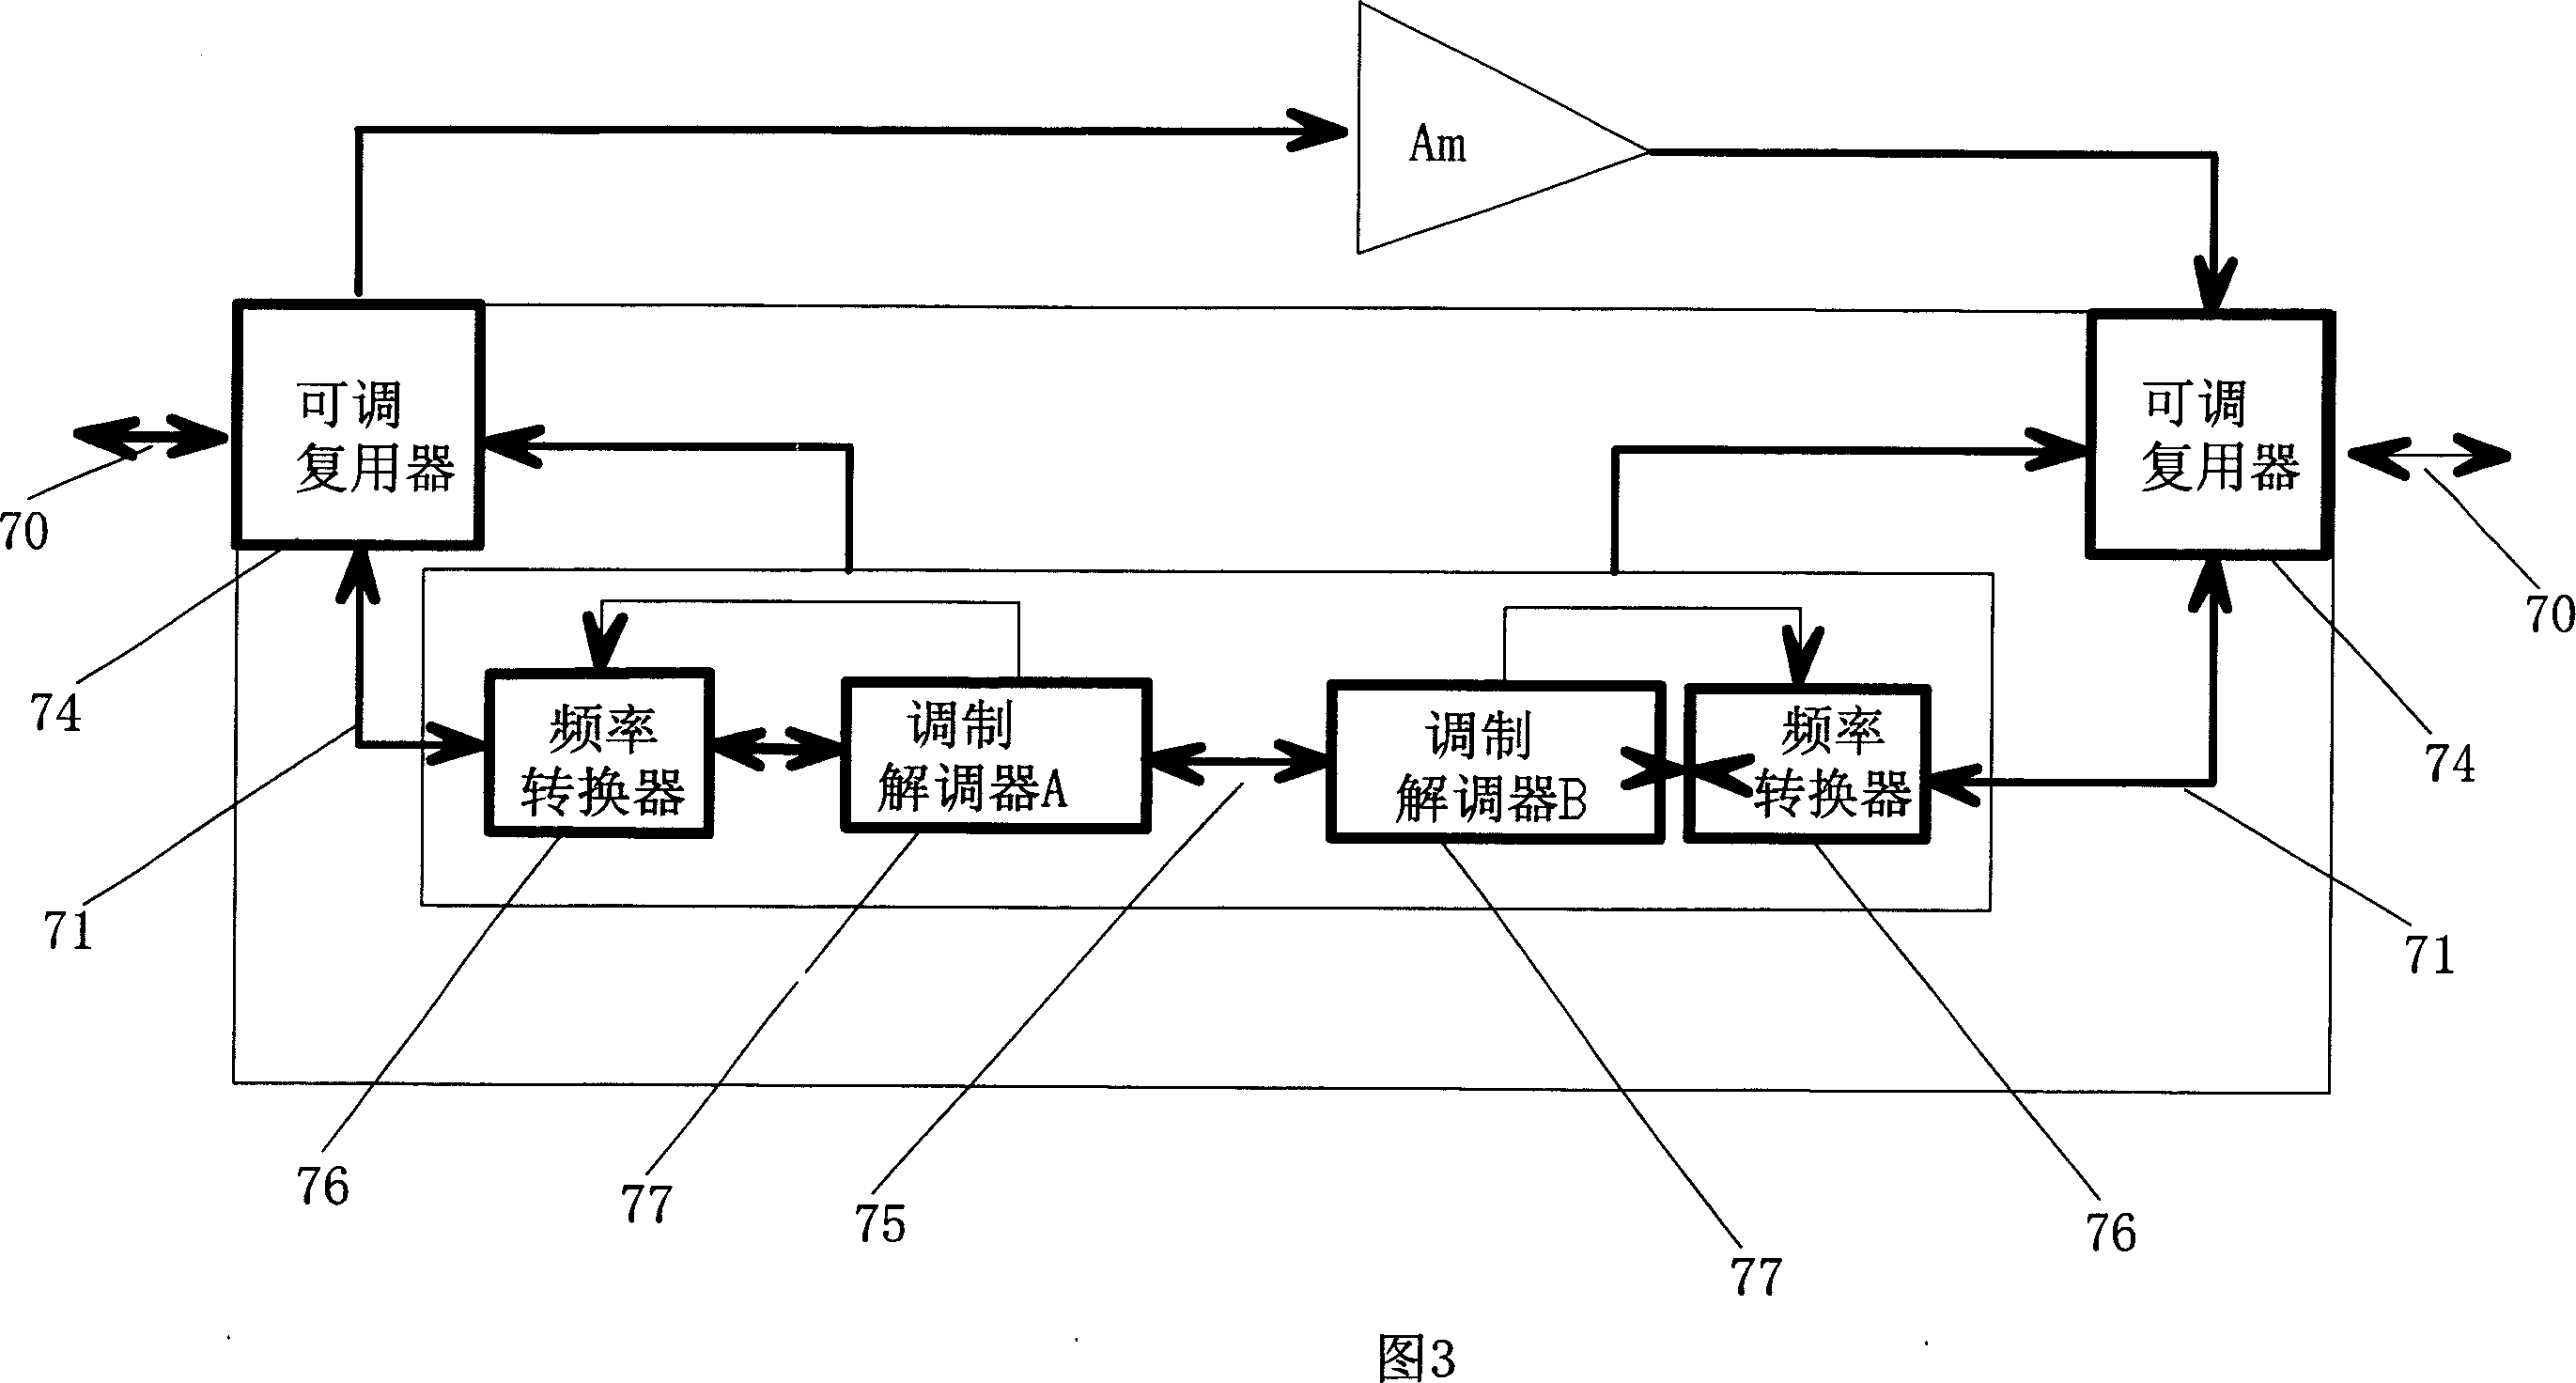 Method and device for carrying out remote both way communications by using cable TV network